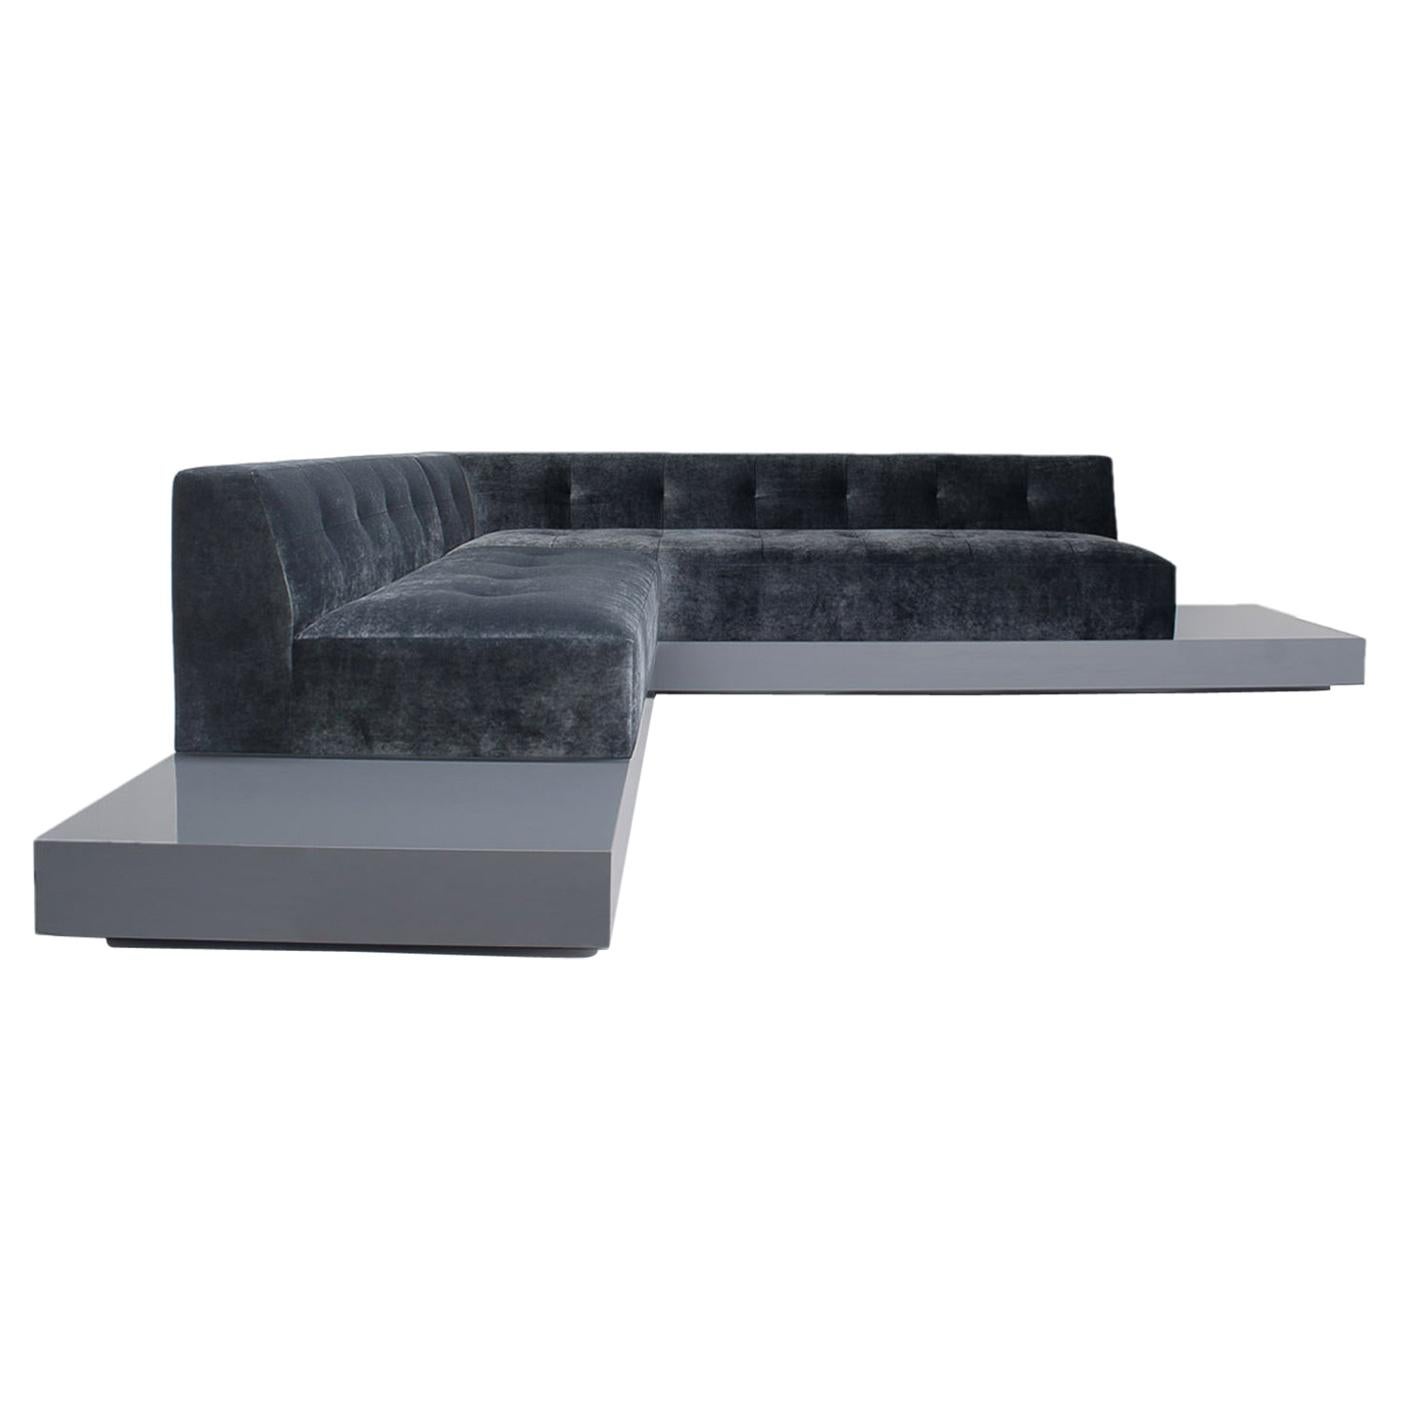 Lizo Sectional-Tight Seat & Back, Lacquer Base, Pull Tufting, Storage, Upholster For Sale